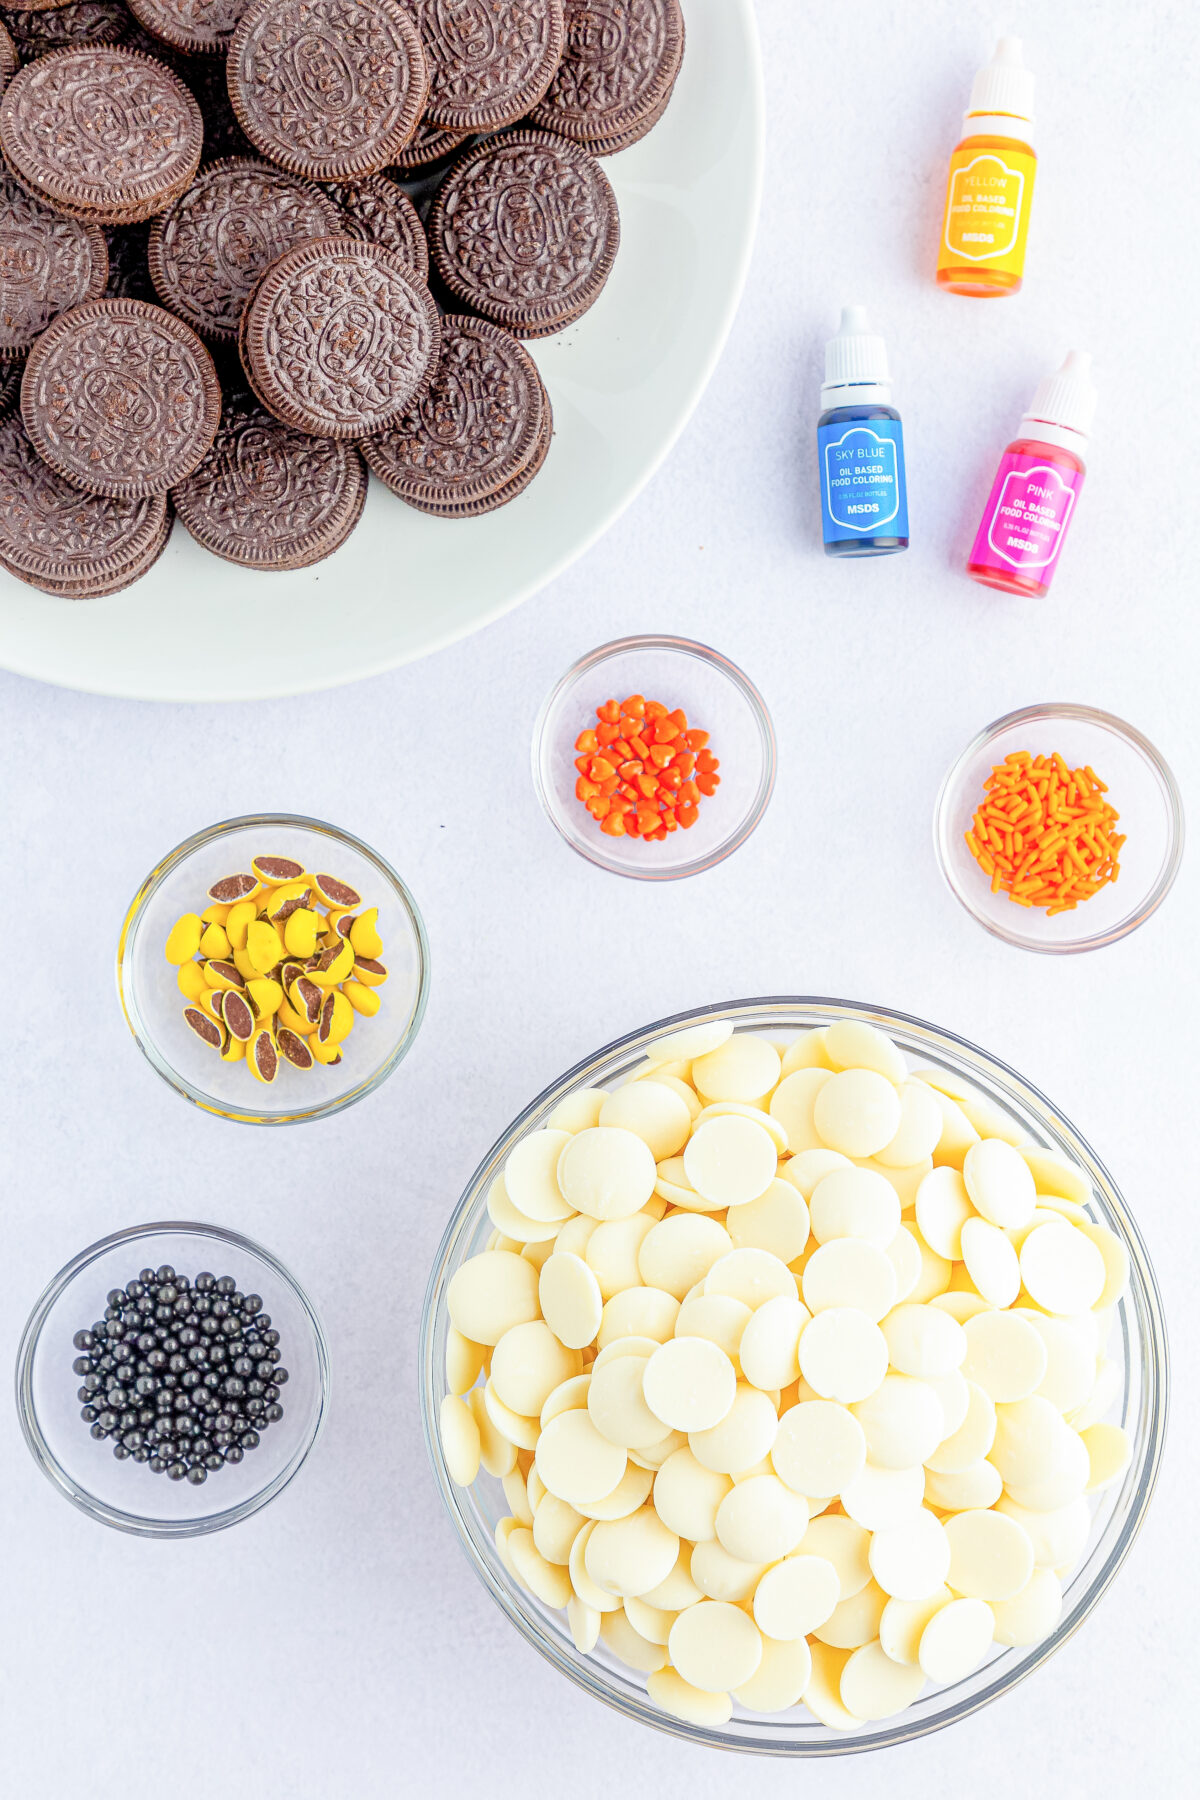 Ingredients for Easter chocolate dipped Oreos.